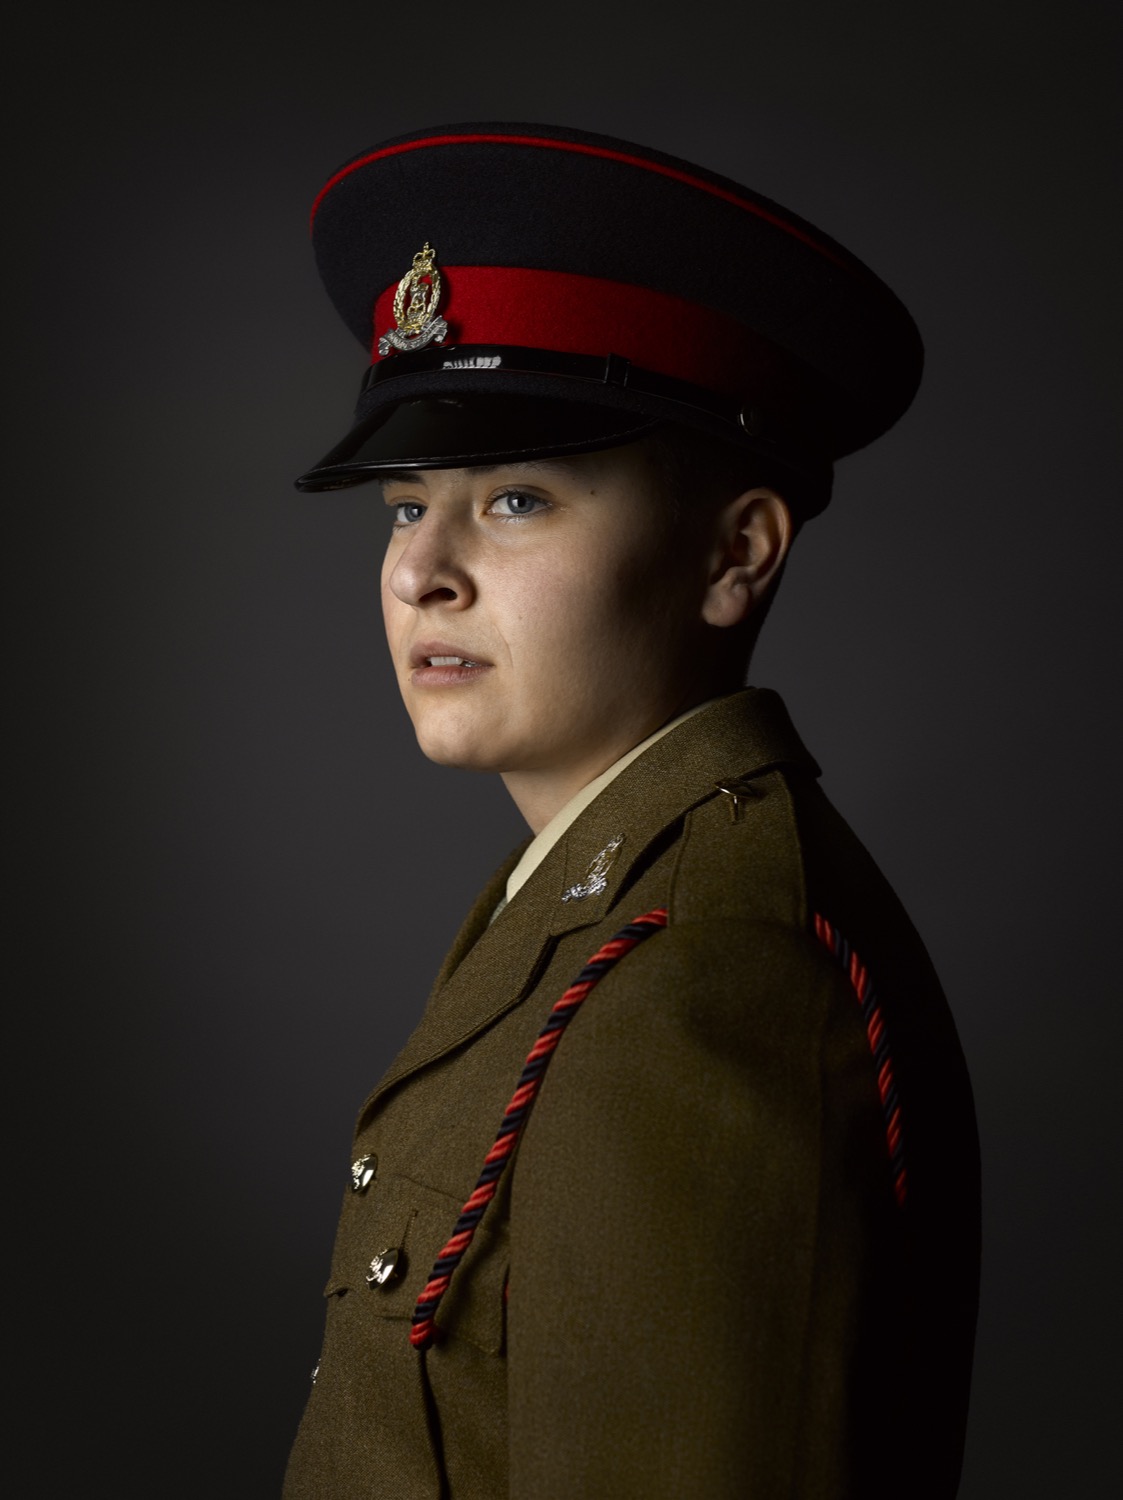 Pvt Liam Lancaster-Smith Adjutant General's Corps (Rory Lewis Photographer) 2018 Transgender Army Portraits